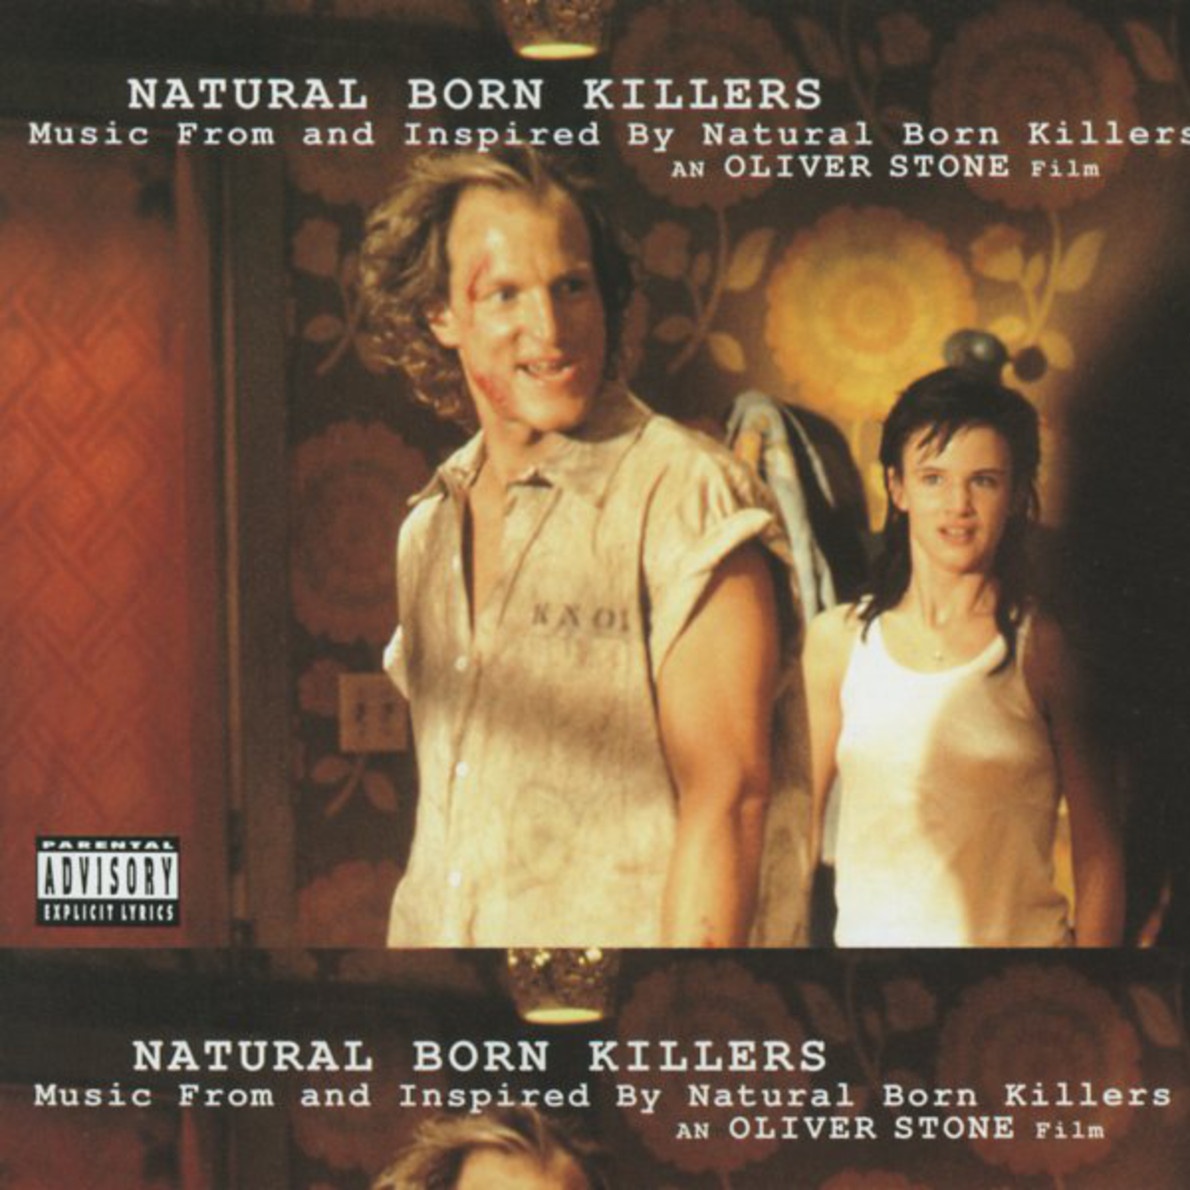 Sweet Jane - From "Natural Born Killers" Soundtrack